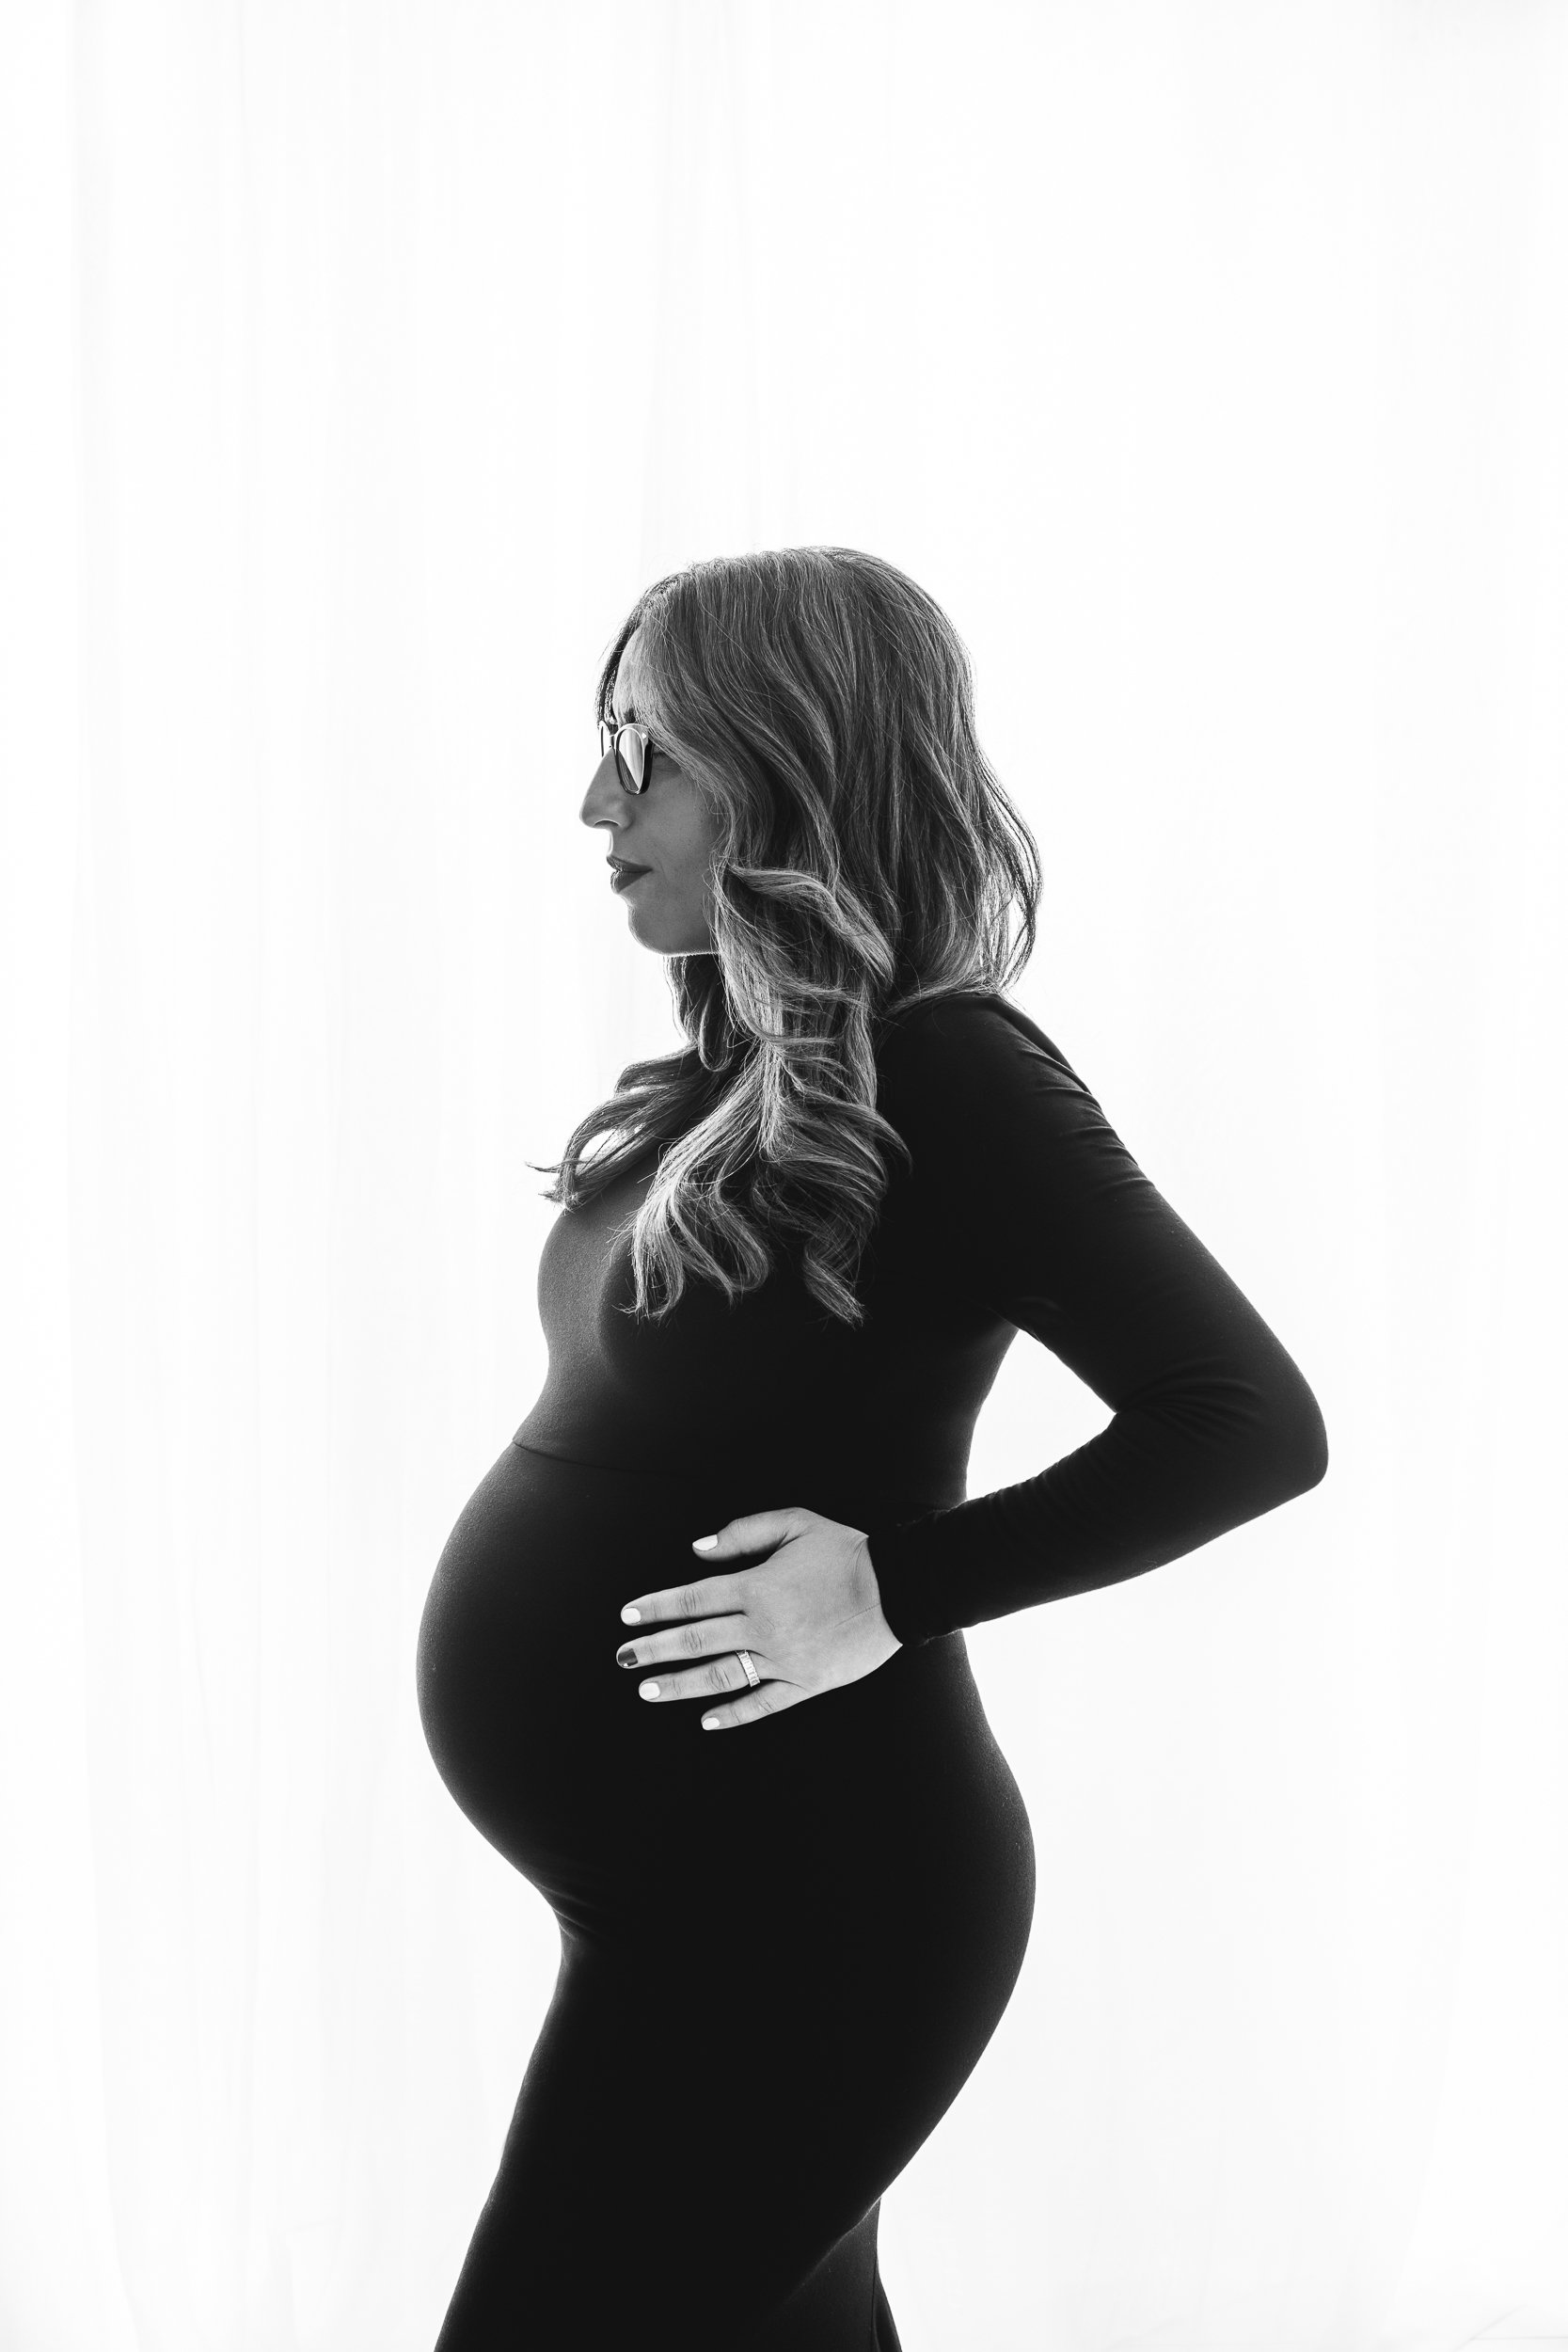  NJ maternity photographer Nicole Hawkins Photography captures a black and white silhouette of a mother-to-be. mother to be maternity shot #NicoleHawkinsPhotography #maternitysession #NJmaternityphotographer #NewJerseyphotographers #maternityphotos 